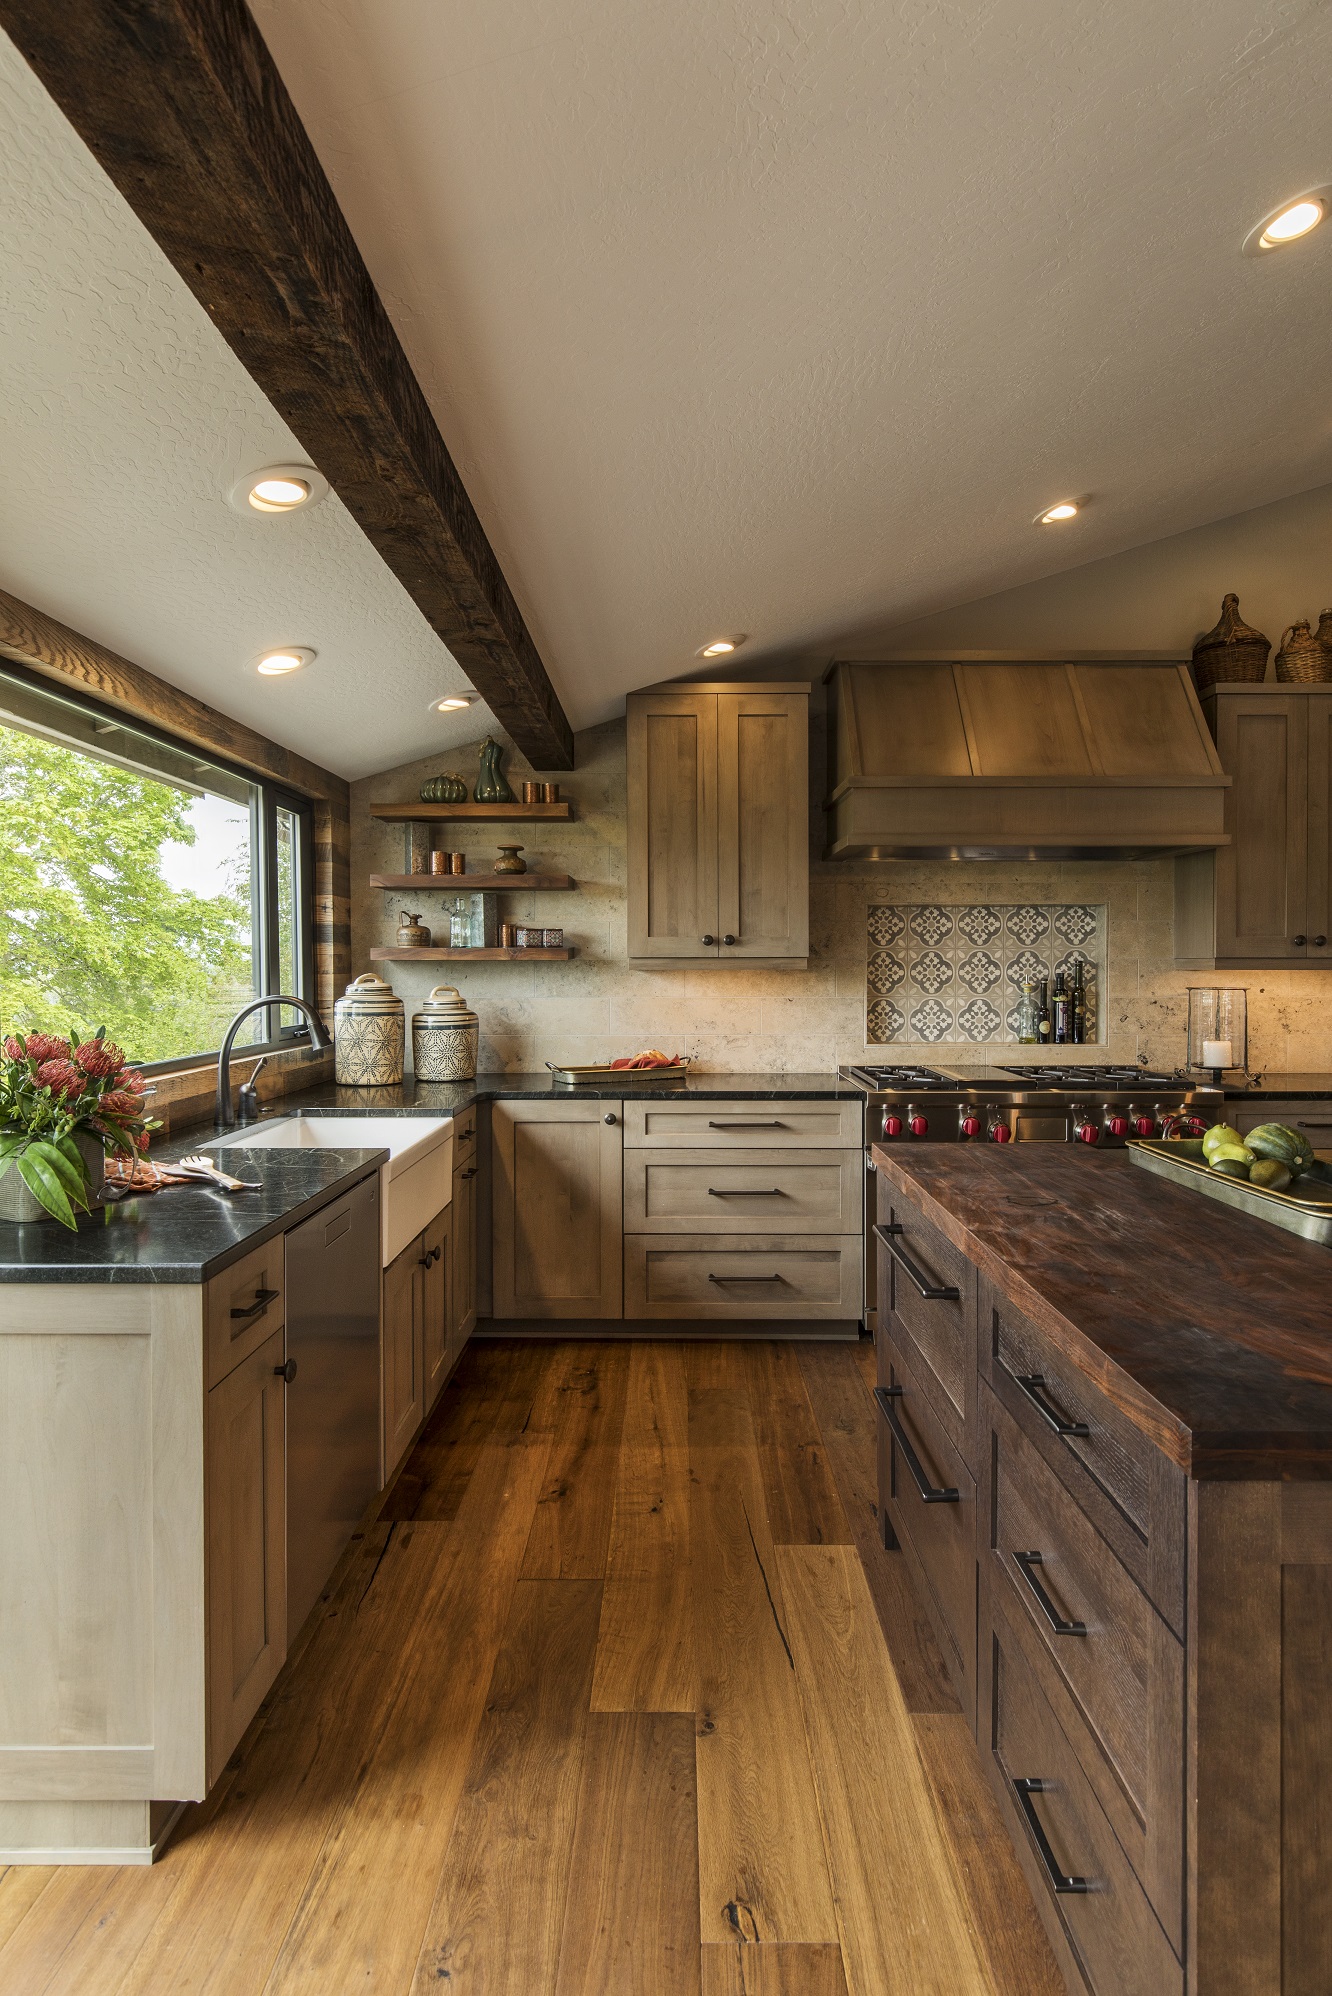 The Kitchen With Wood, Warmth, and the Wow Factor